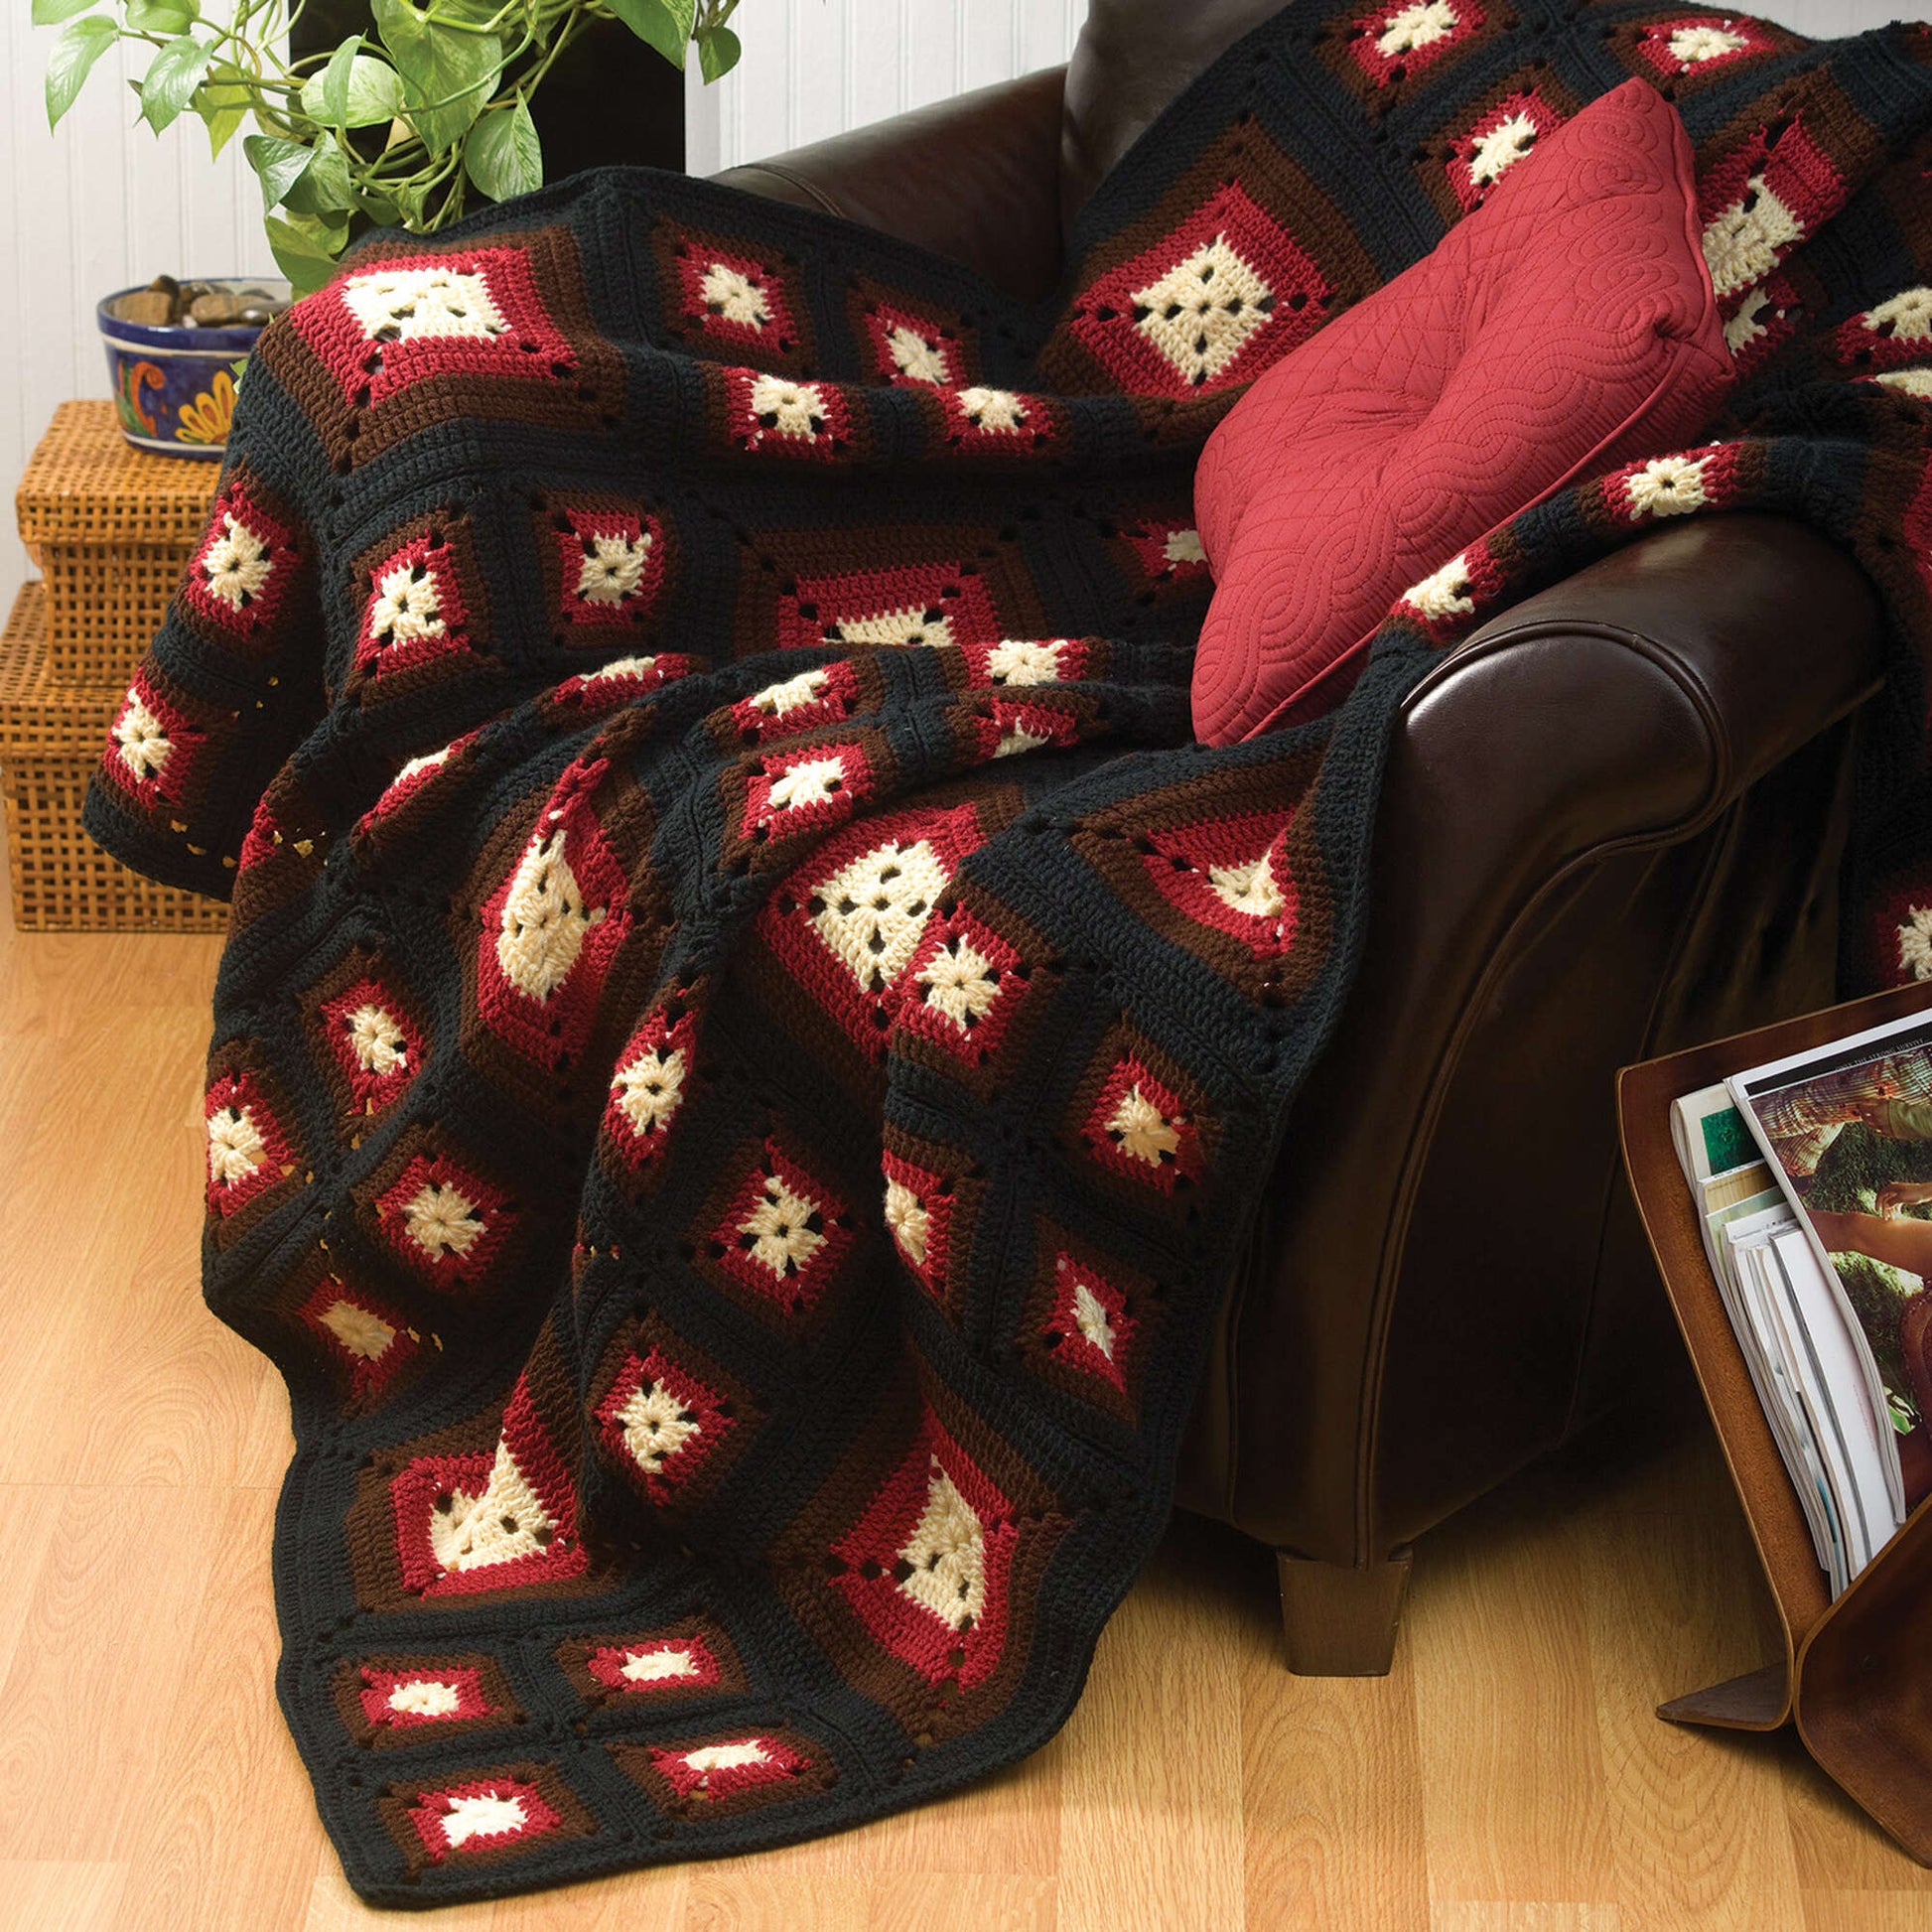 Free Caron Crochet Today's Granny Afghan Pattern